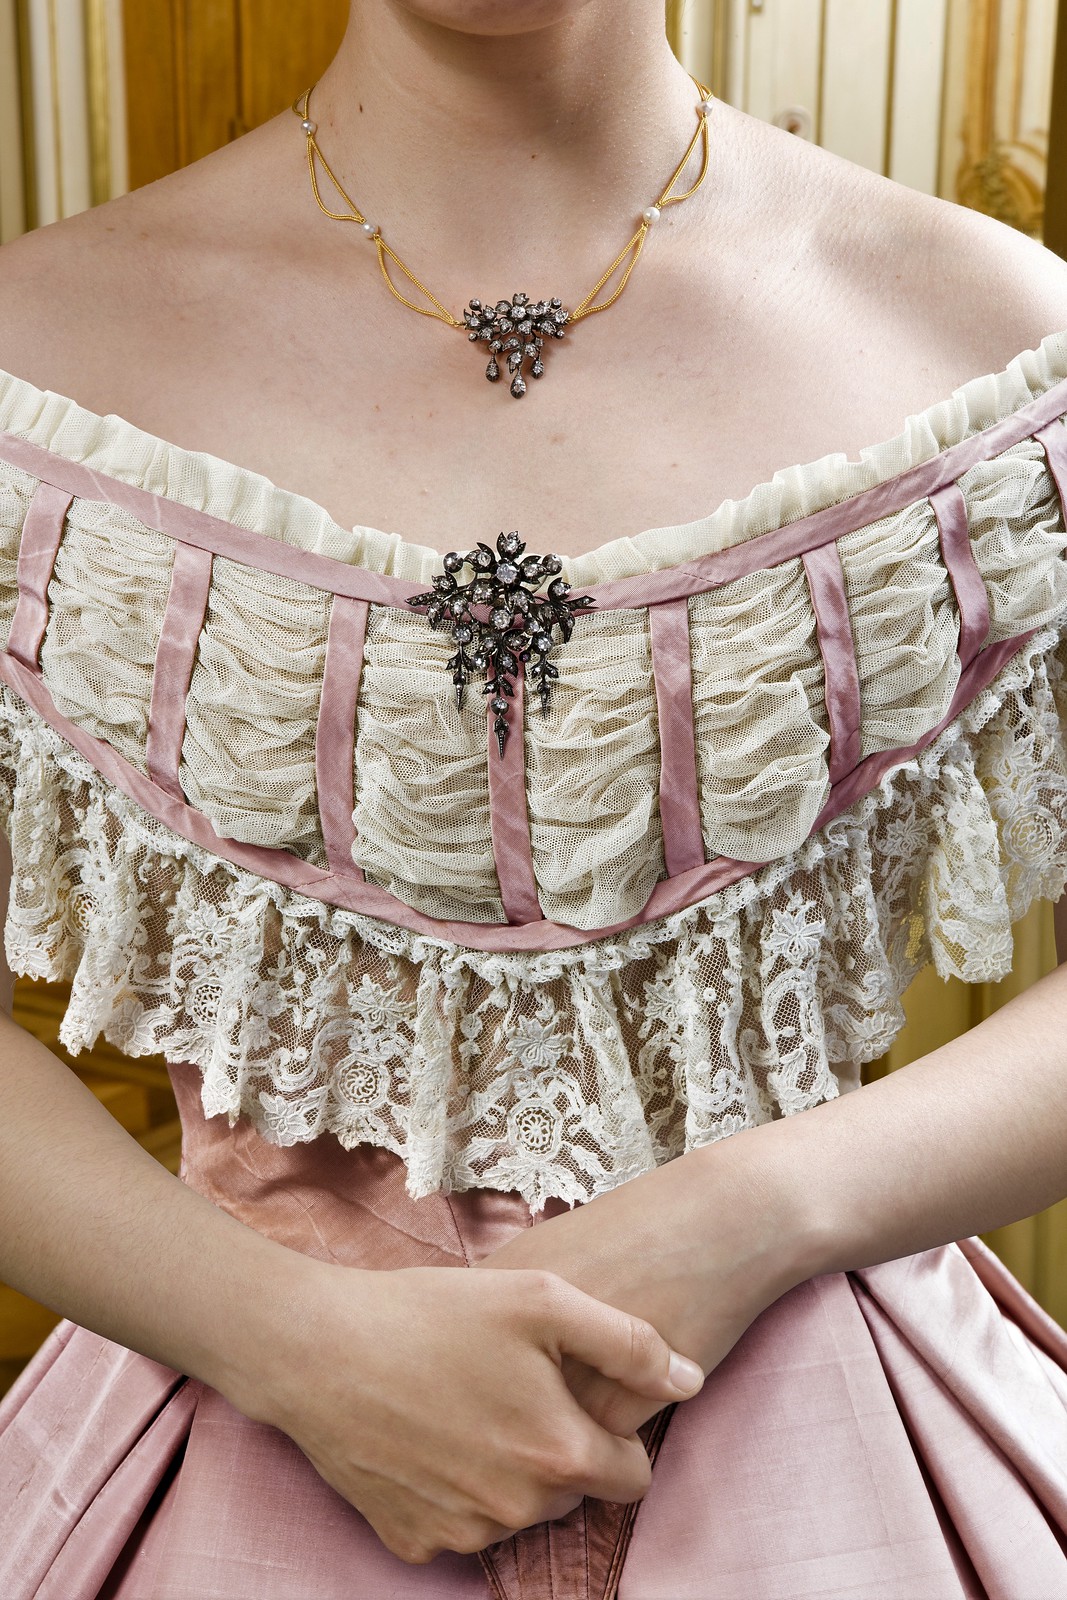 Detail of the dress Wilhelmina was wearing for the portrait of 1865